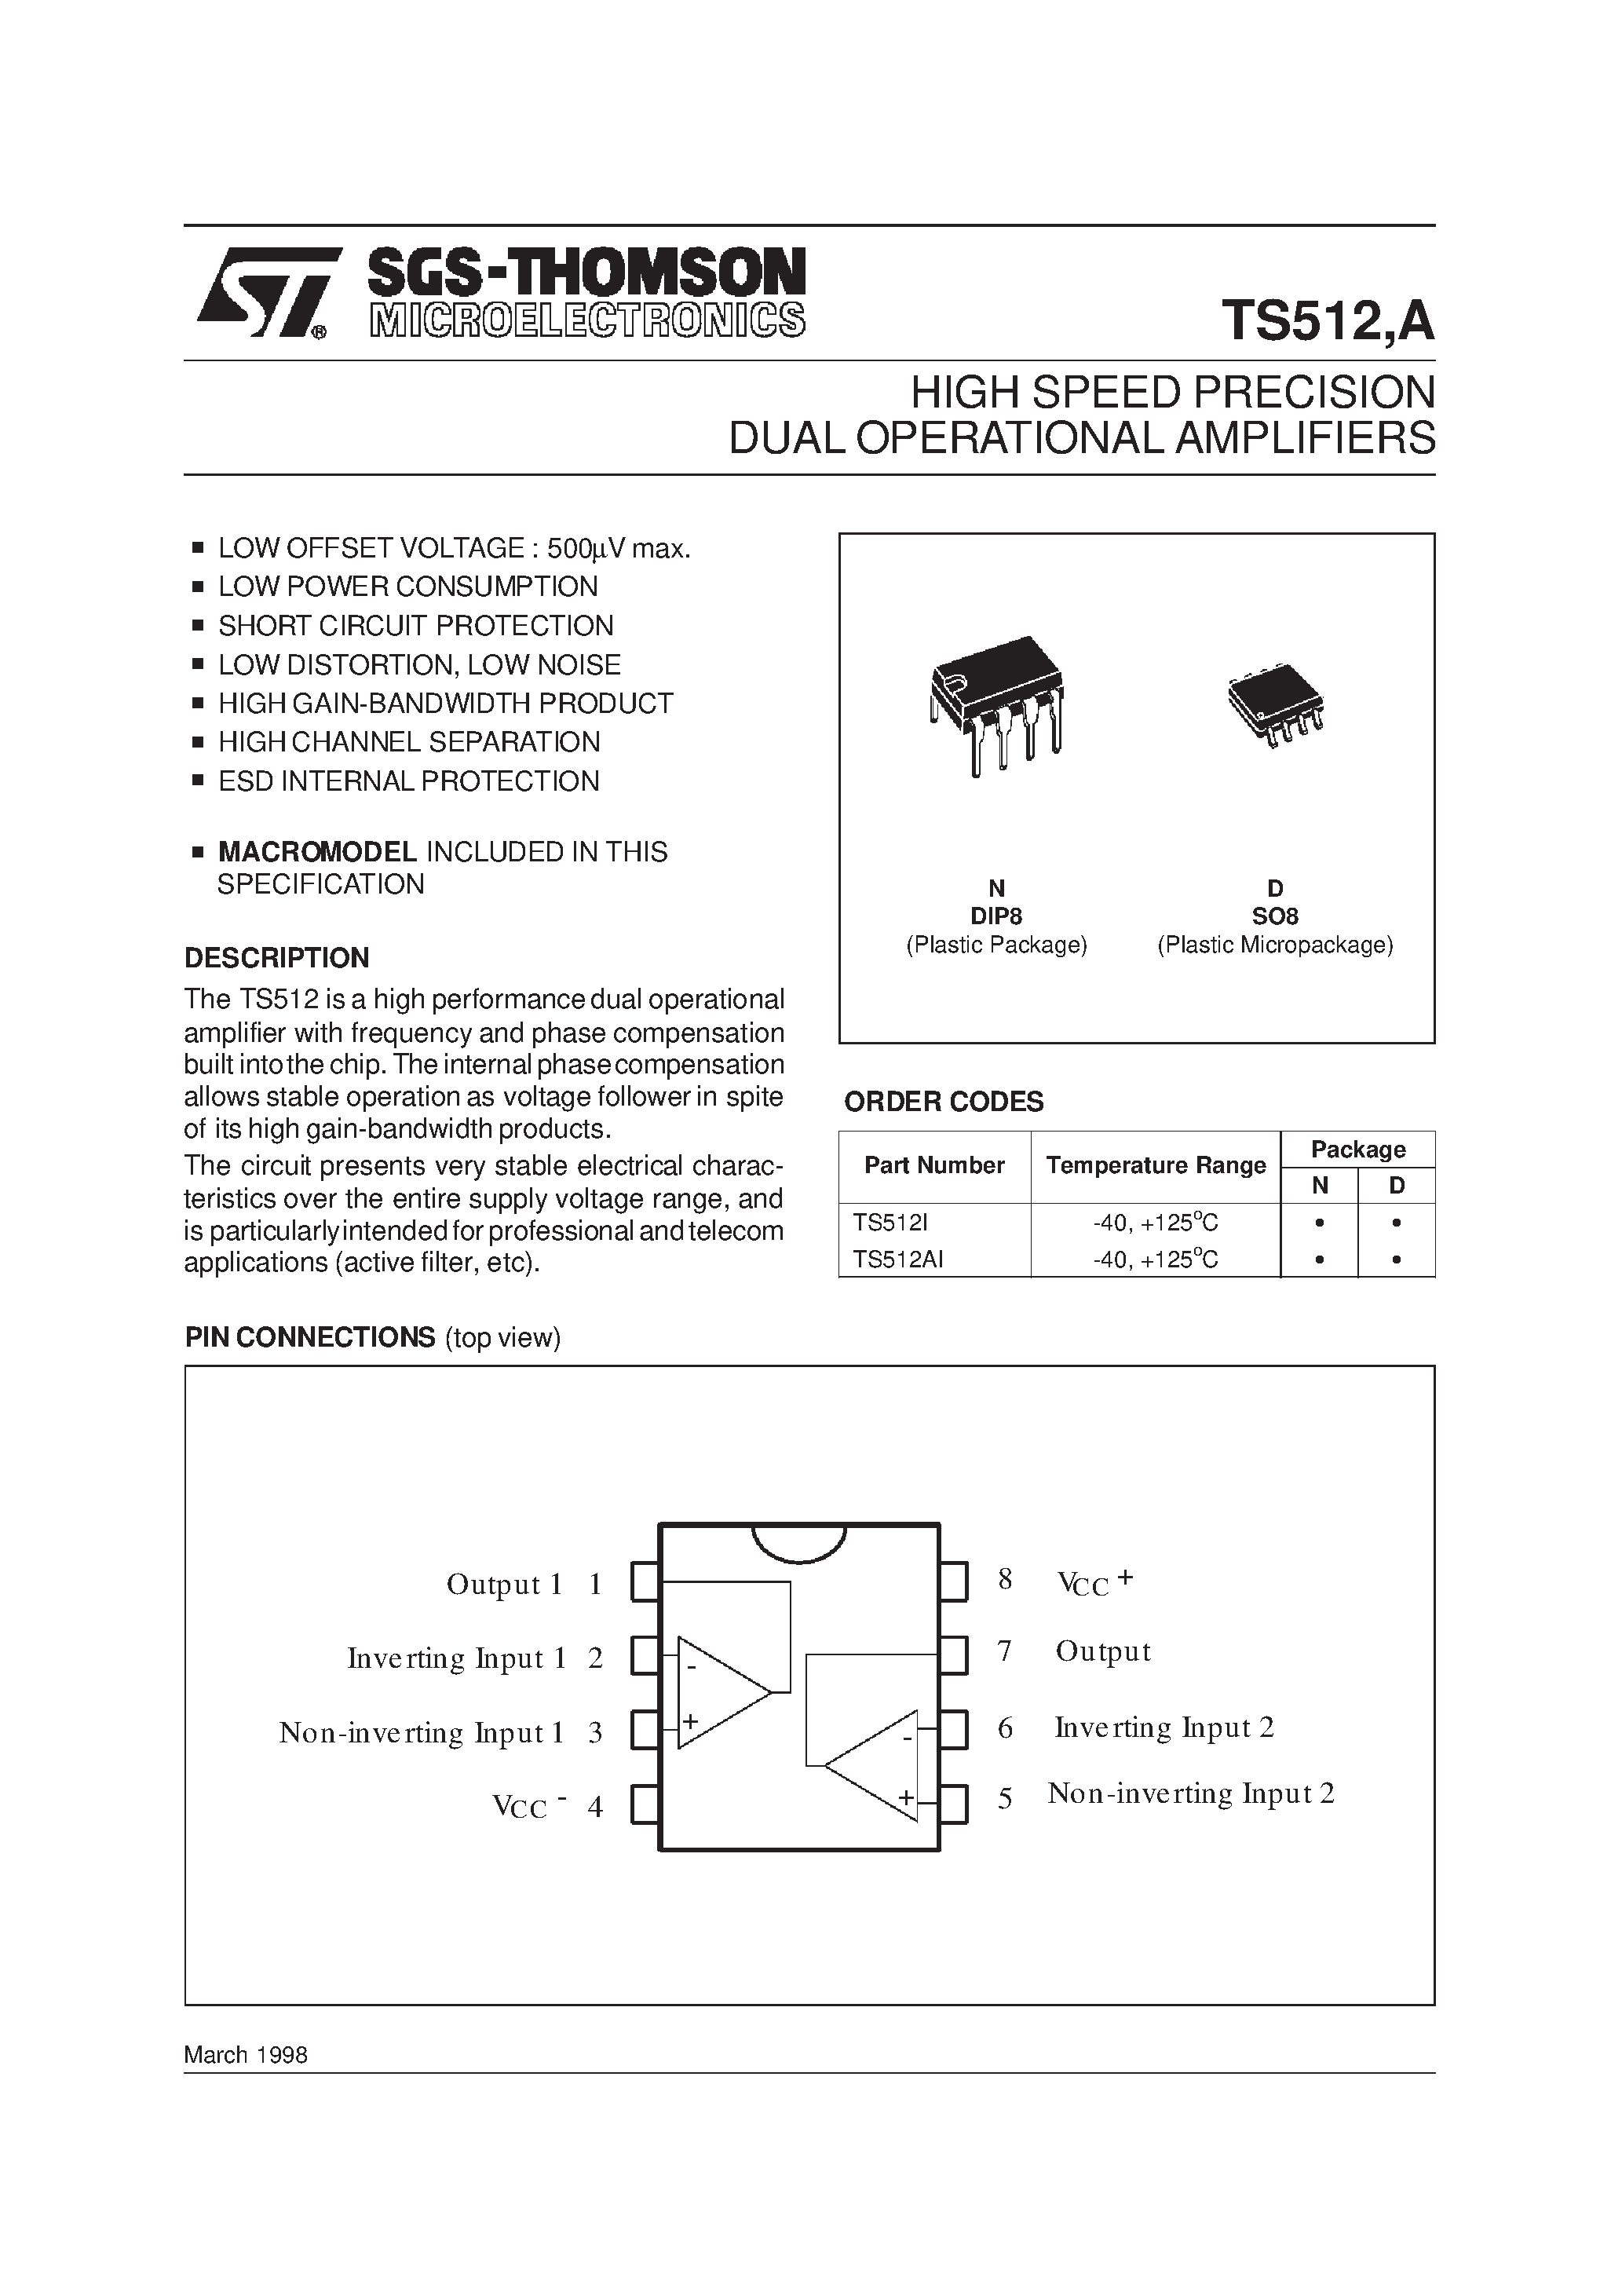 Datasheet TS512AIA - HIGH SPEED PRECISION DUAL OPERATIONAL AMPLIFIERS page 1